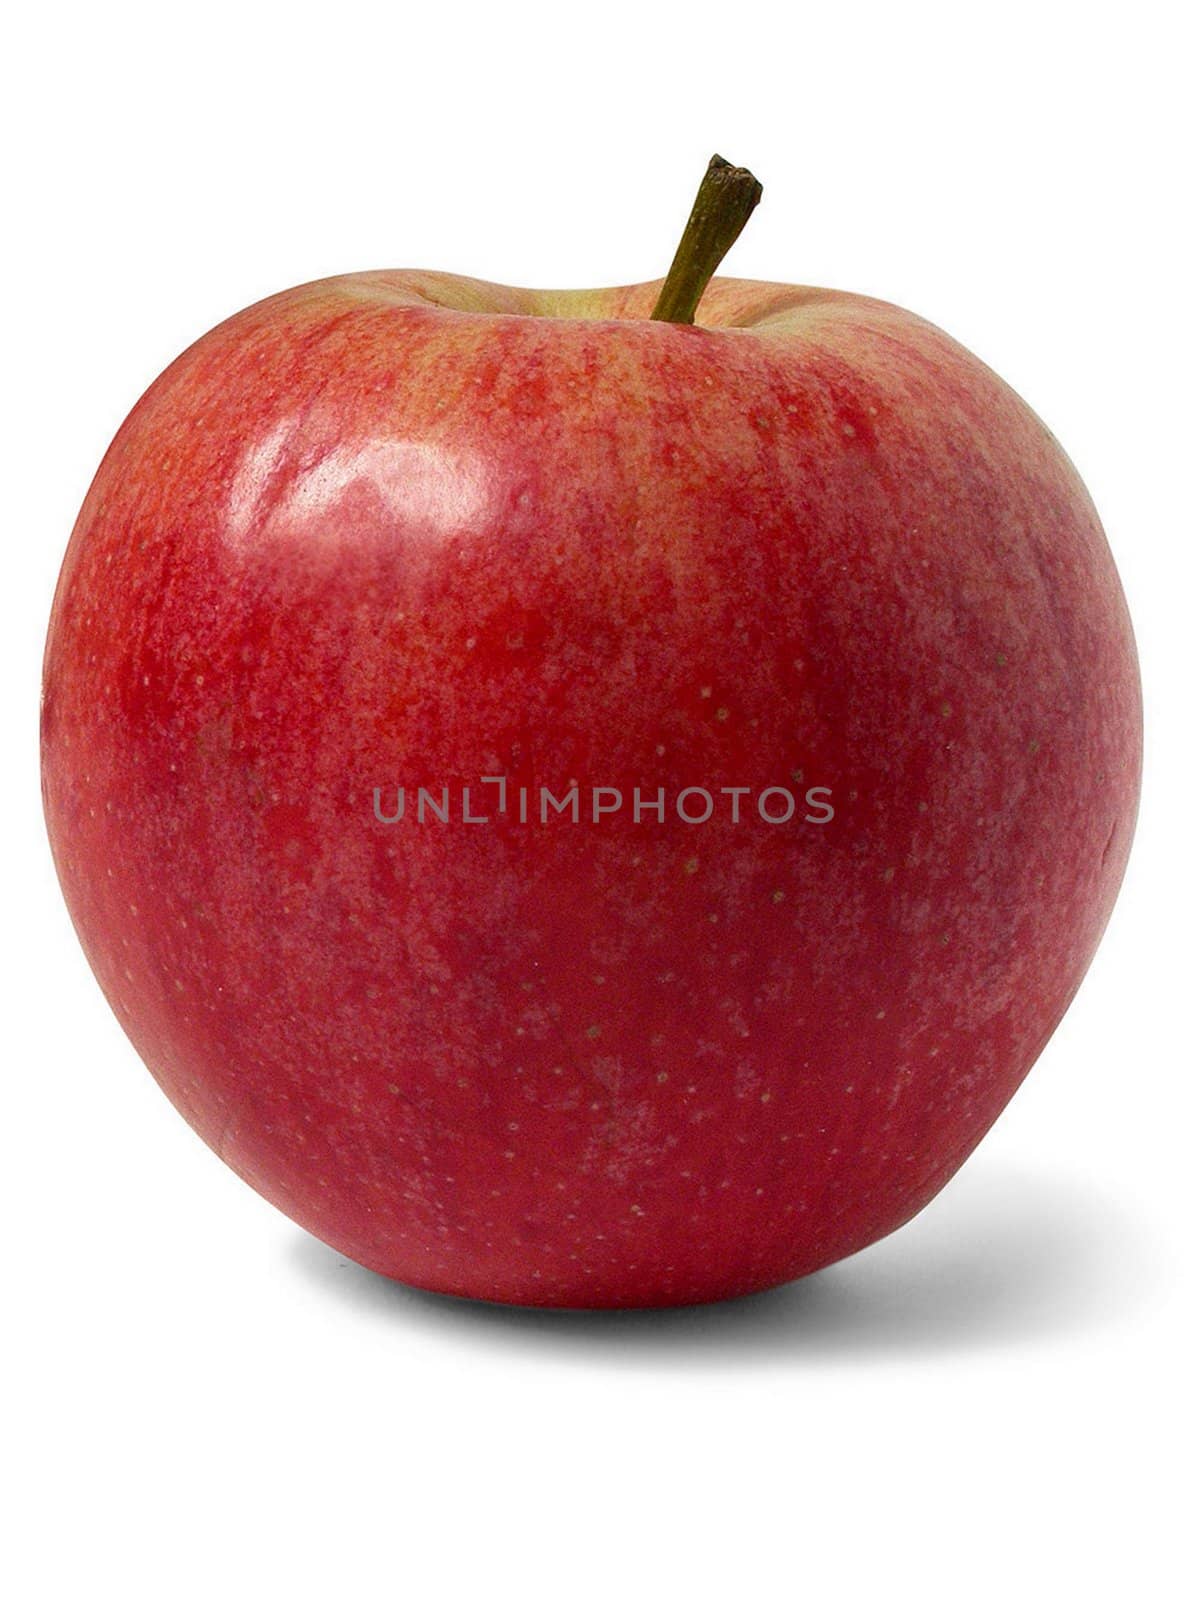 Red Delicious Apple by Baltus